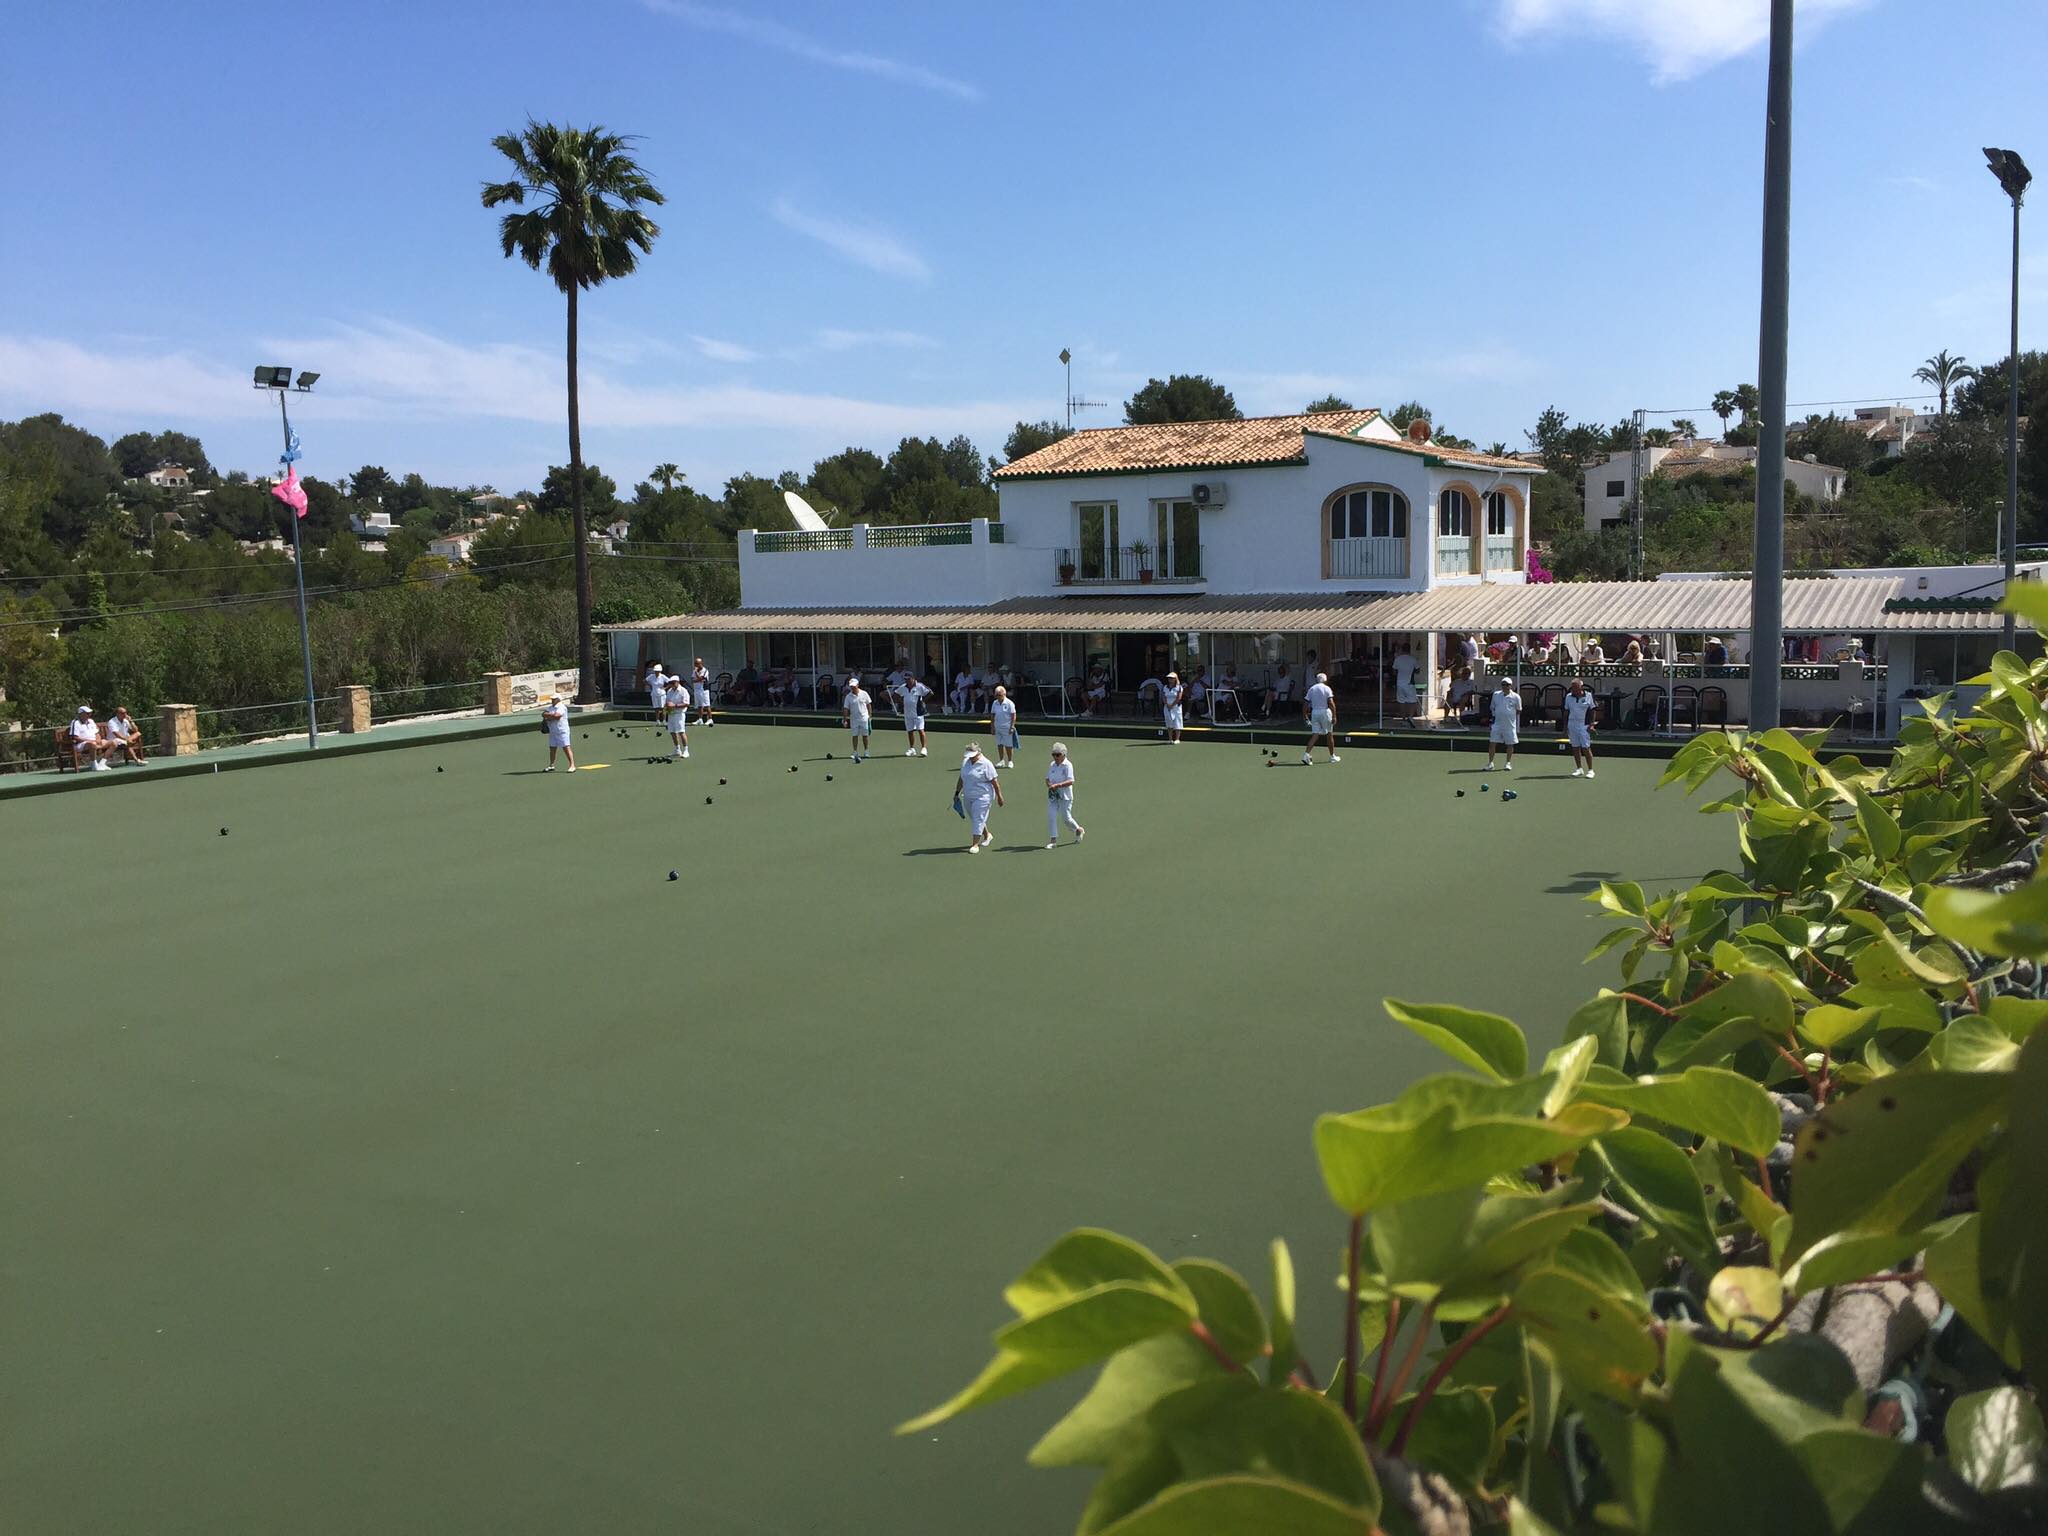 British expat bowls players get unwelcome shock news on Spain's Costa Blanca